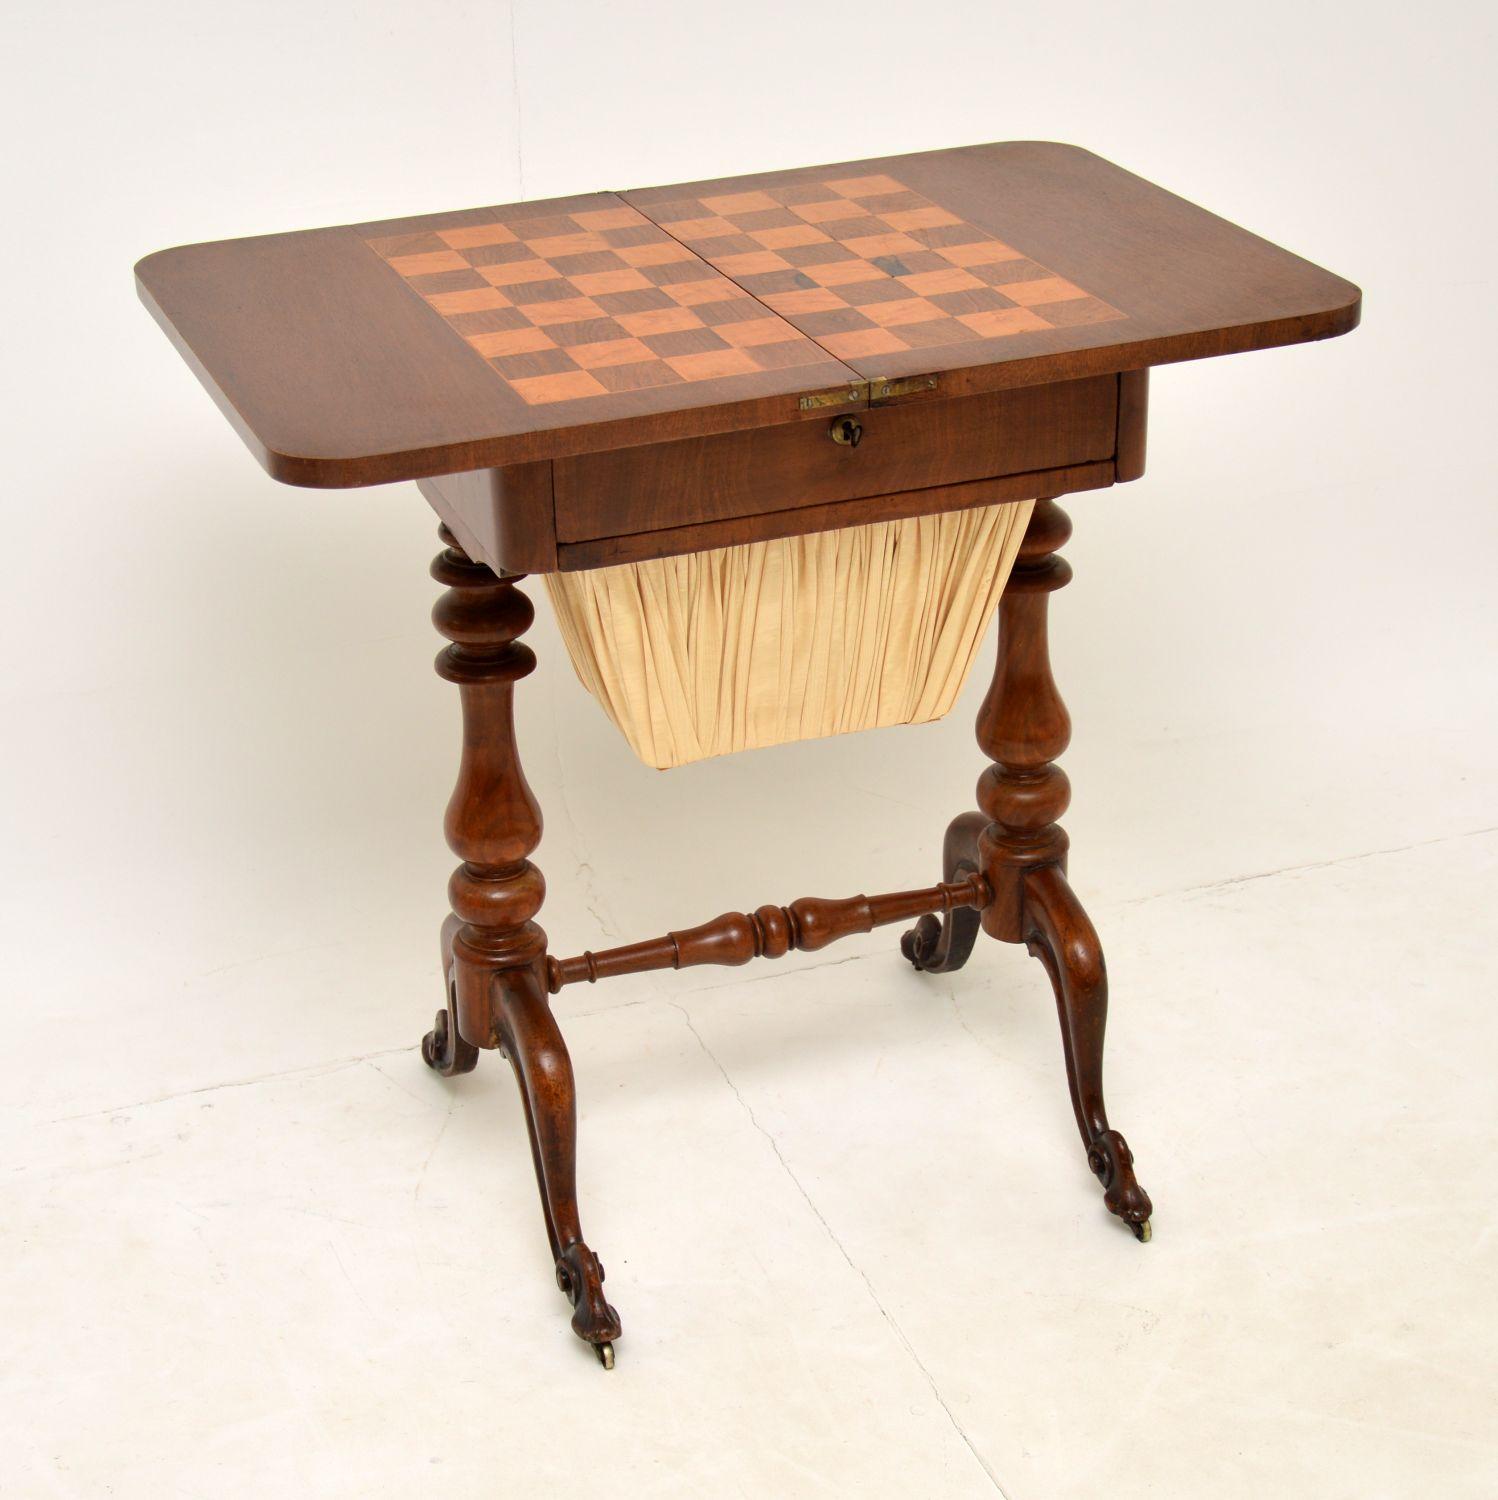 A lovely antique Victorian games table in walnut. This was made in England and dates from the 1850-1870 period.

It is very refined and of excellent quality. The top rotates and unfolds to reveal a built in chess board made of inlaid wood and